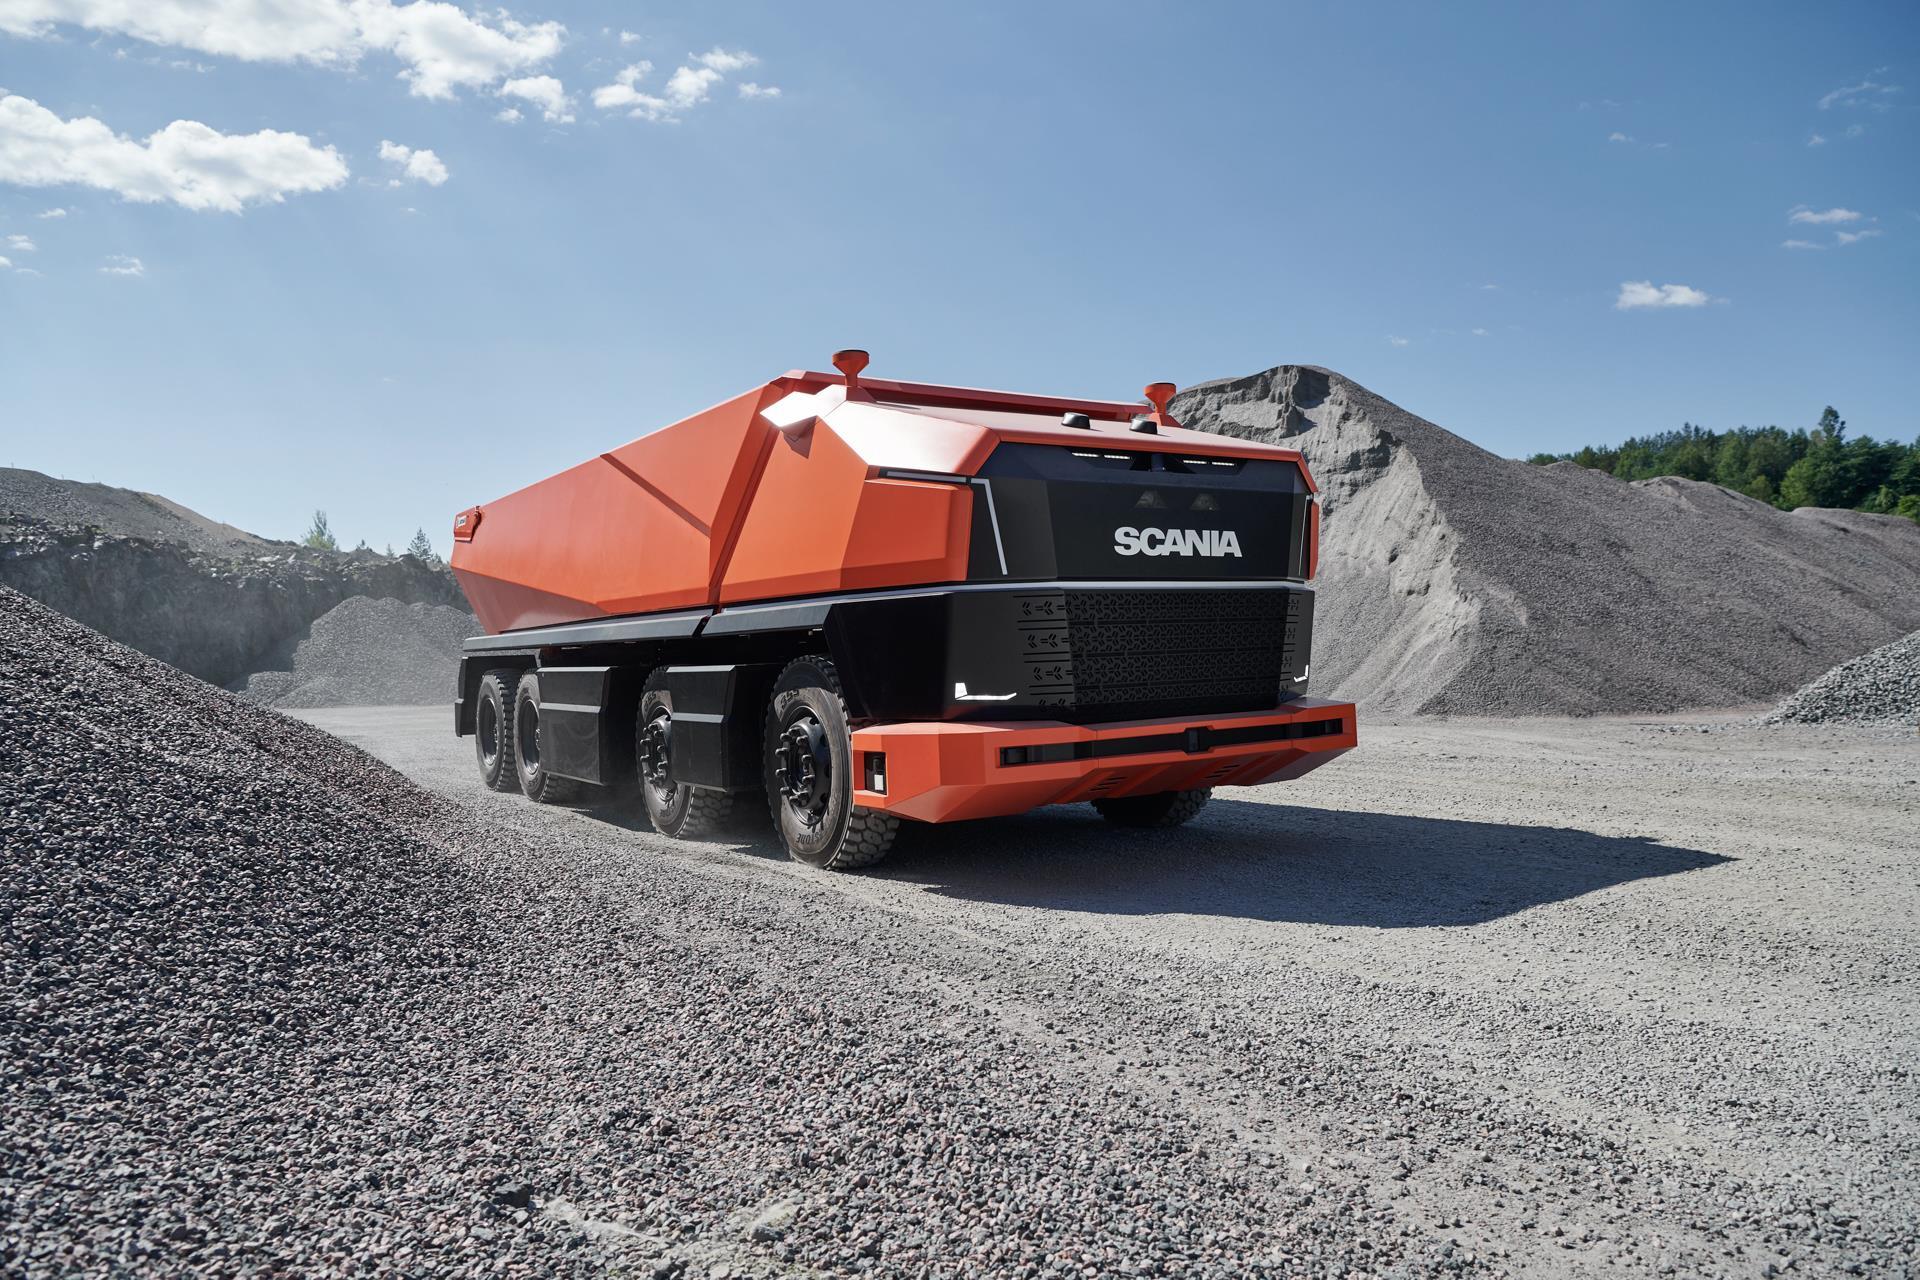 Scania Axl Autonomous Truck Was Created Cabless Article